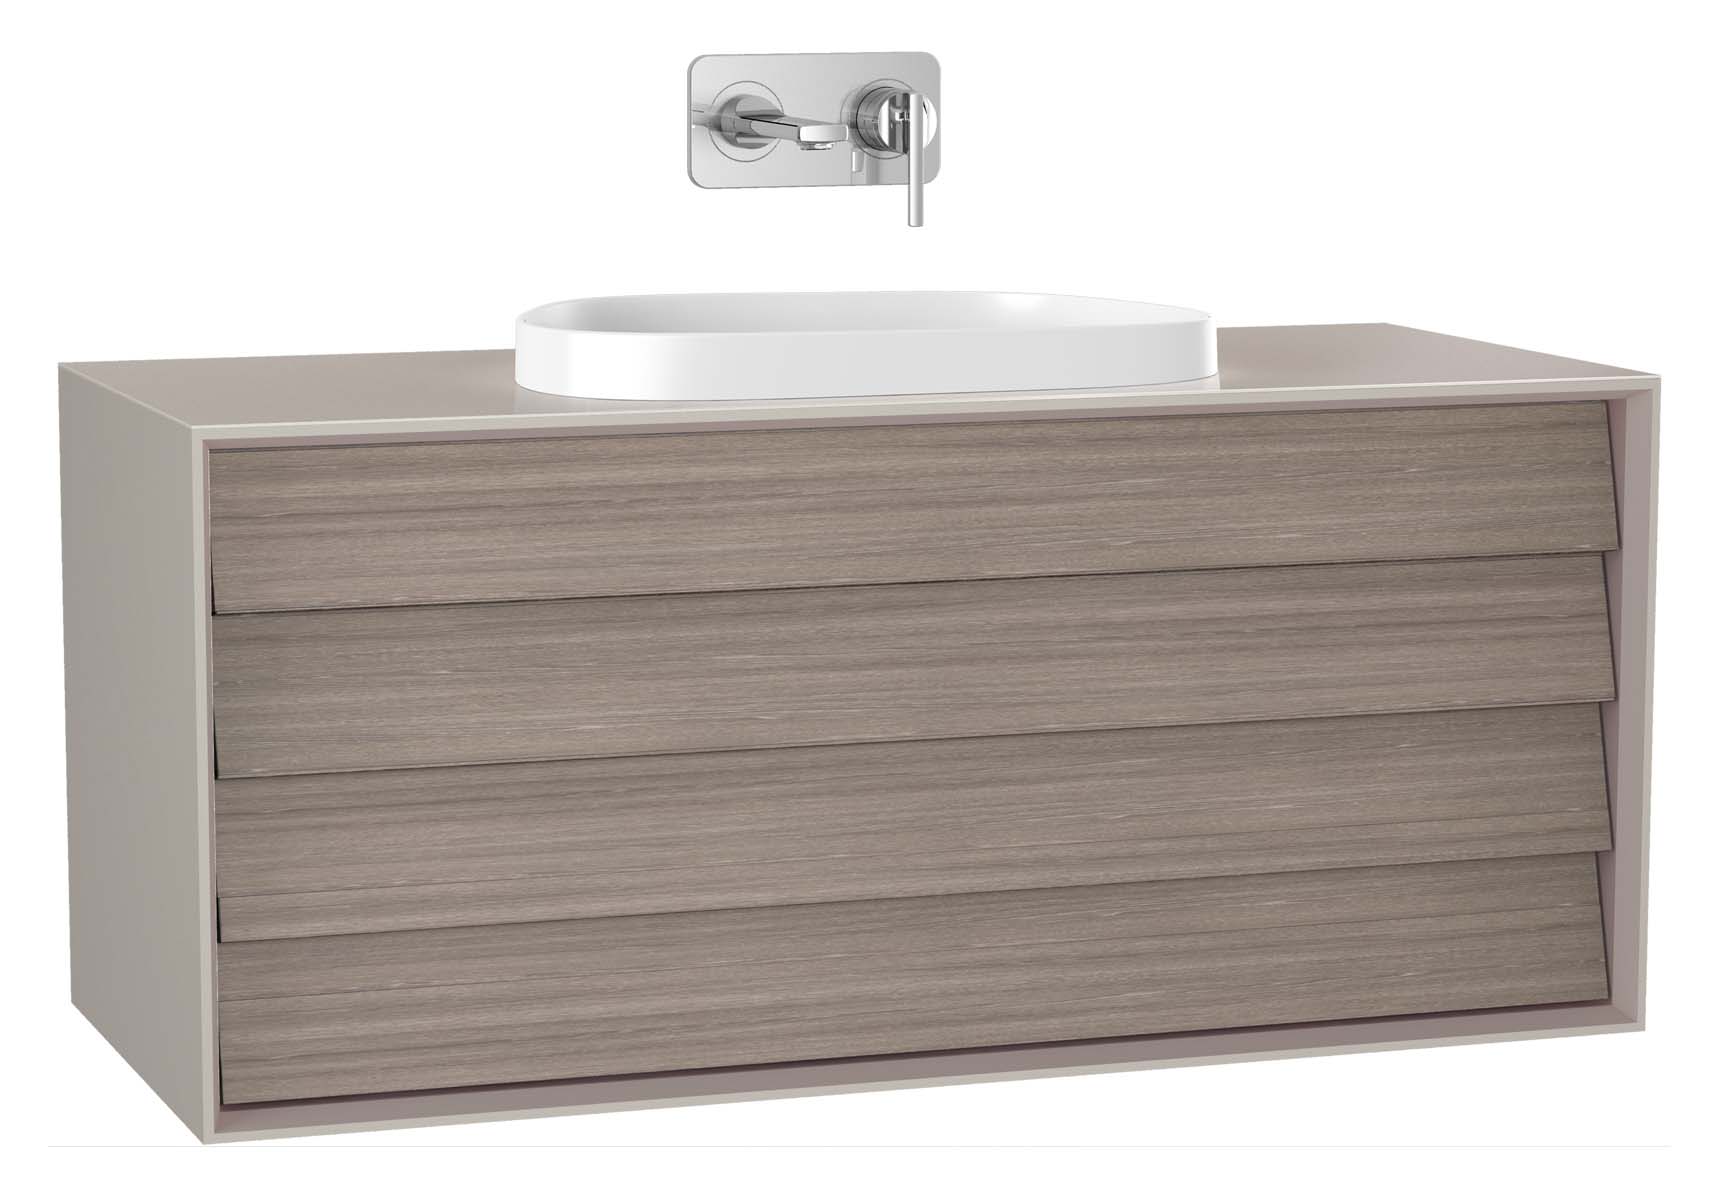 Frame Washbasin Unit, 120 cm, with 2 drawers, with countertop TV-shape washbasin, Matte Taupe